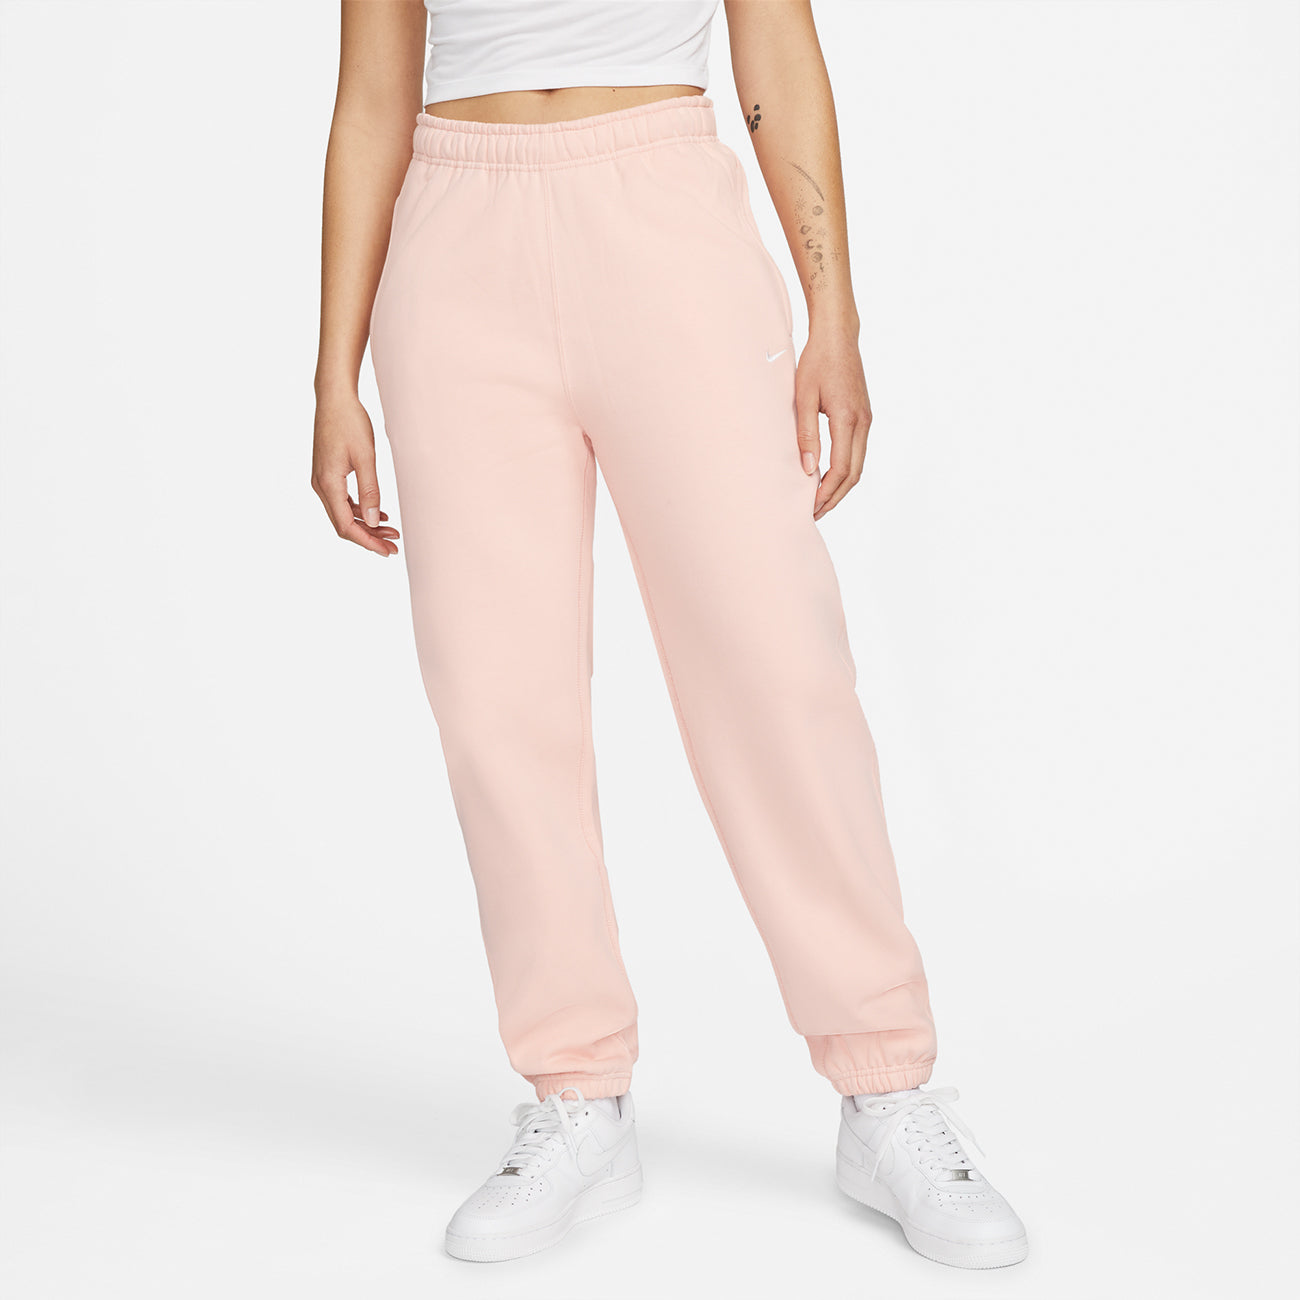 W SOLOSWOOSH FLEECE PANT BLEACHED CORAL WHITE